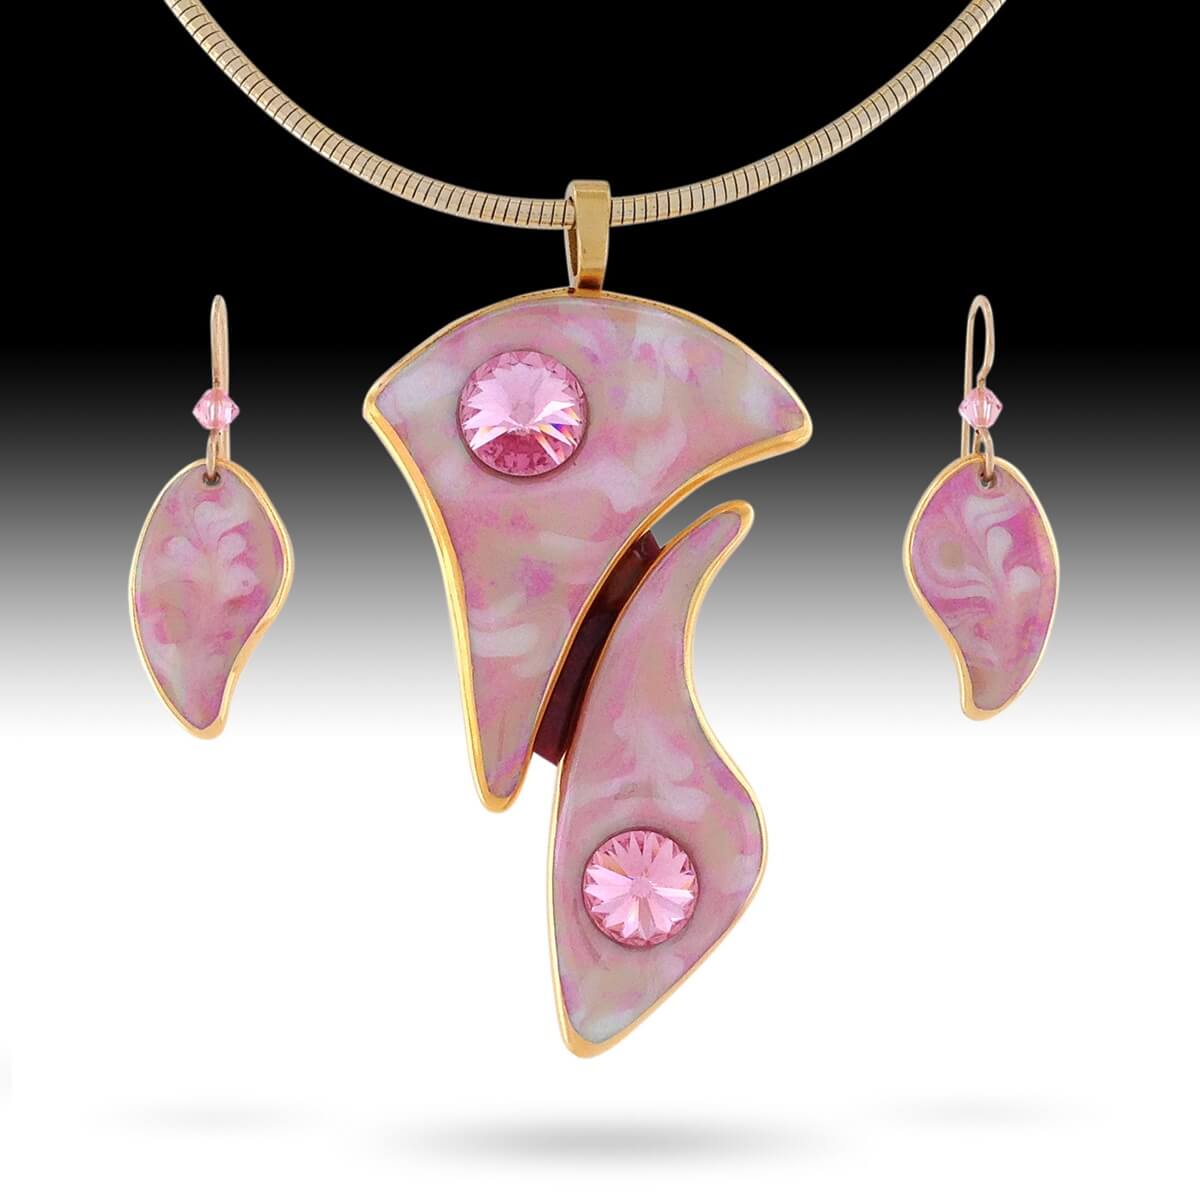 Multi-piece statement pendant with coordinating earrings in rosy pinks. 